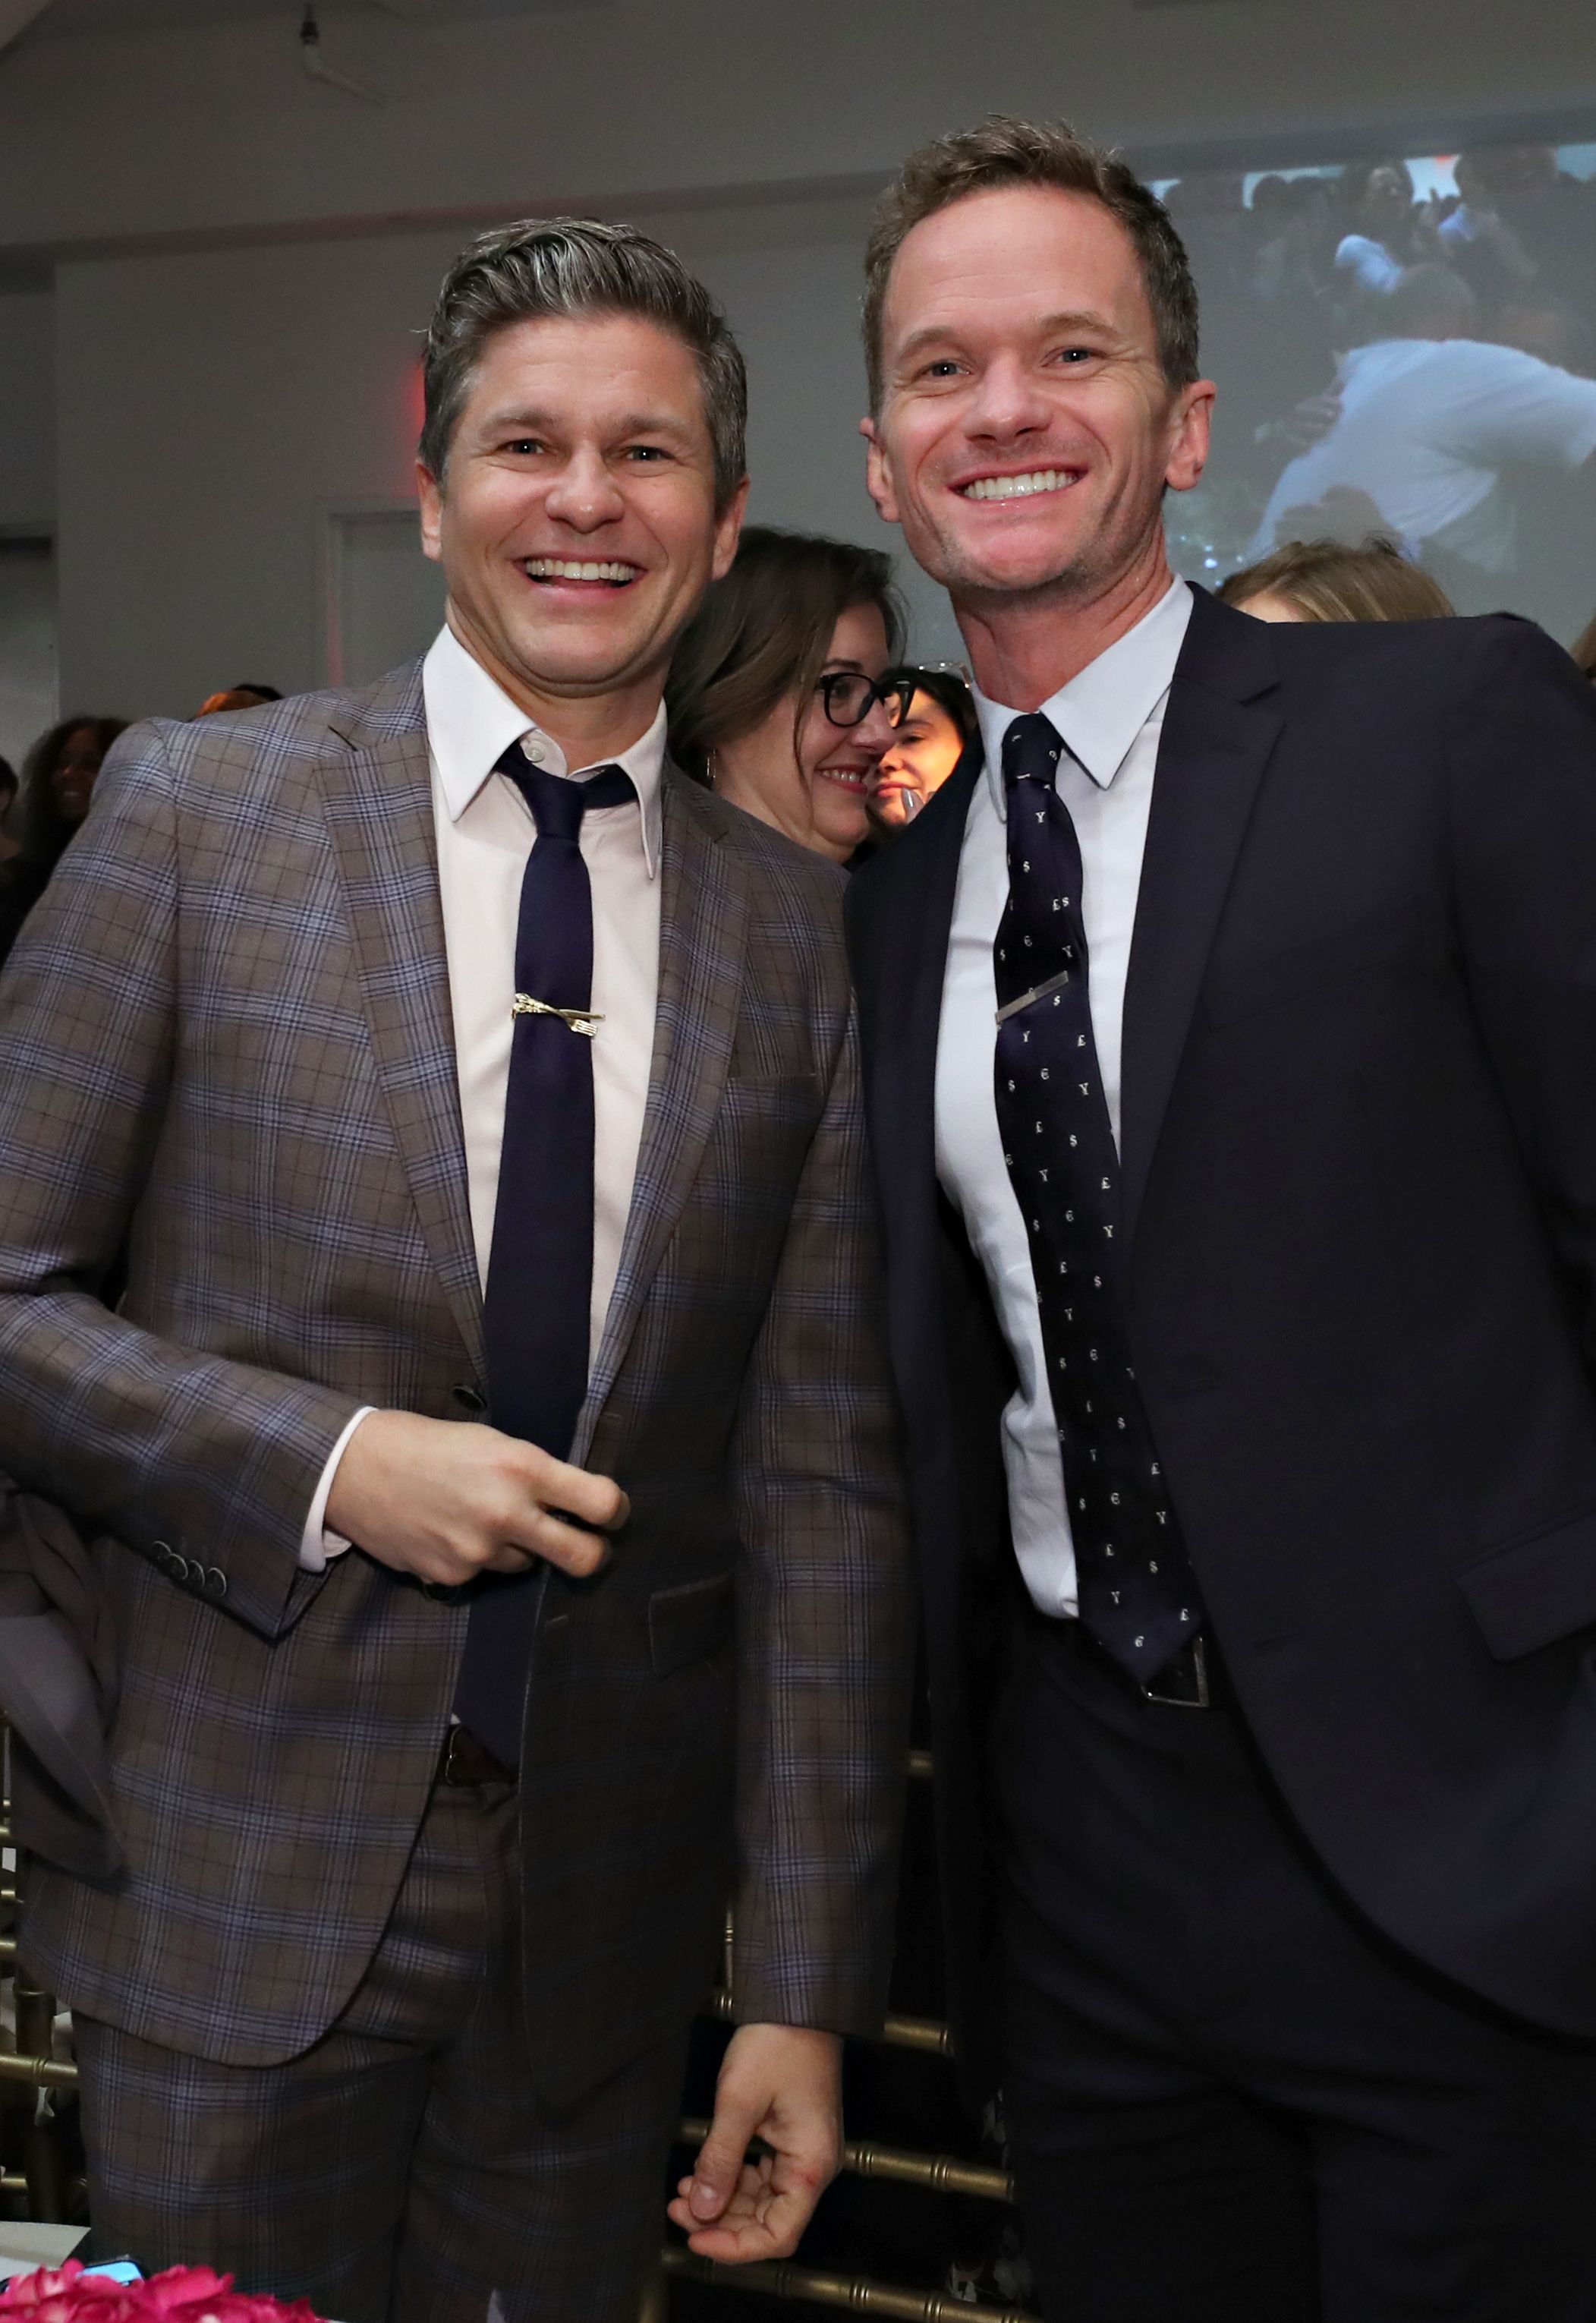 David Burtka and Neil Patrick Harris attend the 2019 Chefs For Kids' Cancer at Metropolitan Pavilion Metro West on March 12, 2019 in New York City. | Photo: Getty Images.